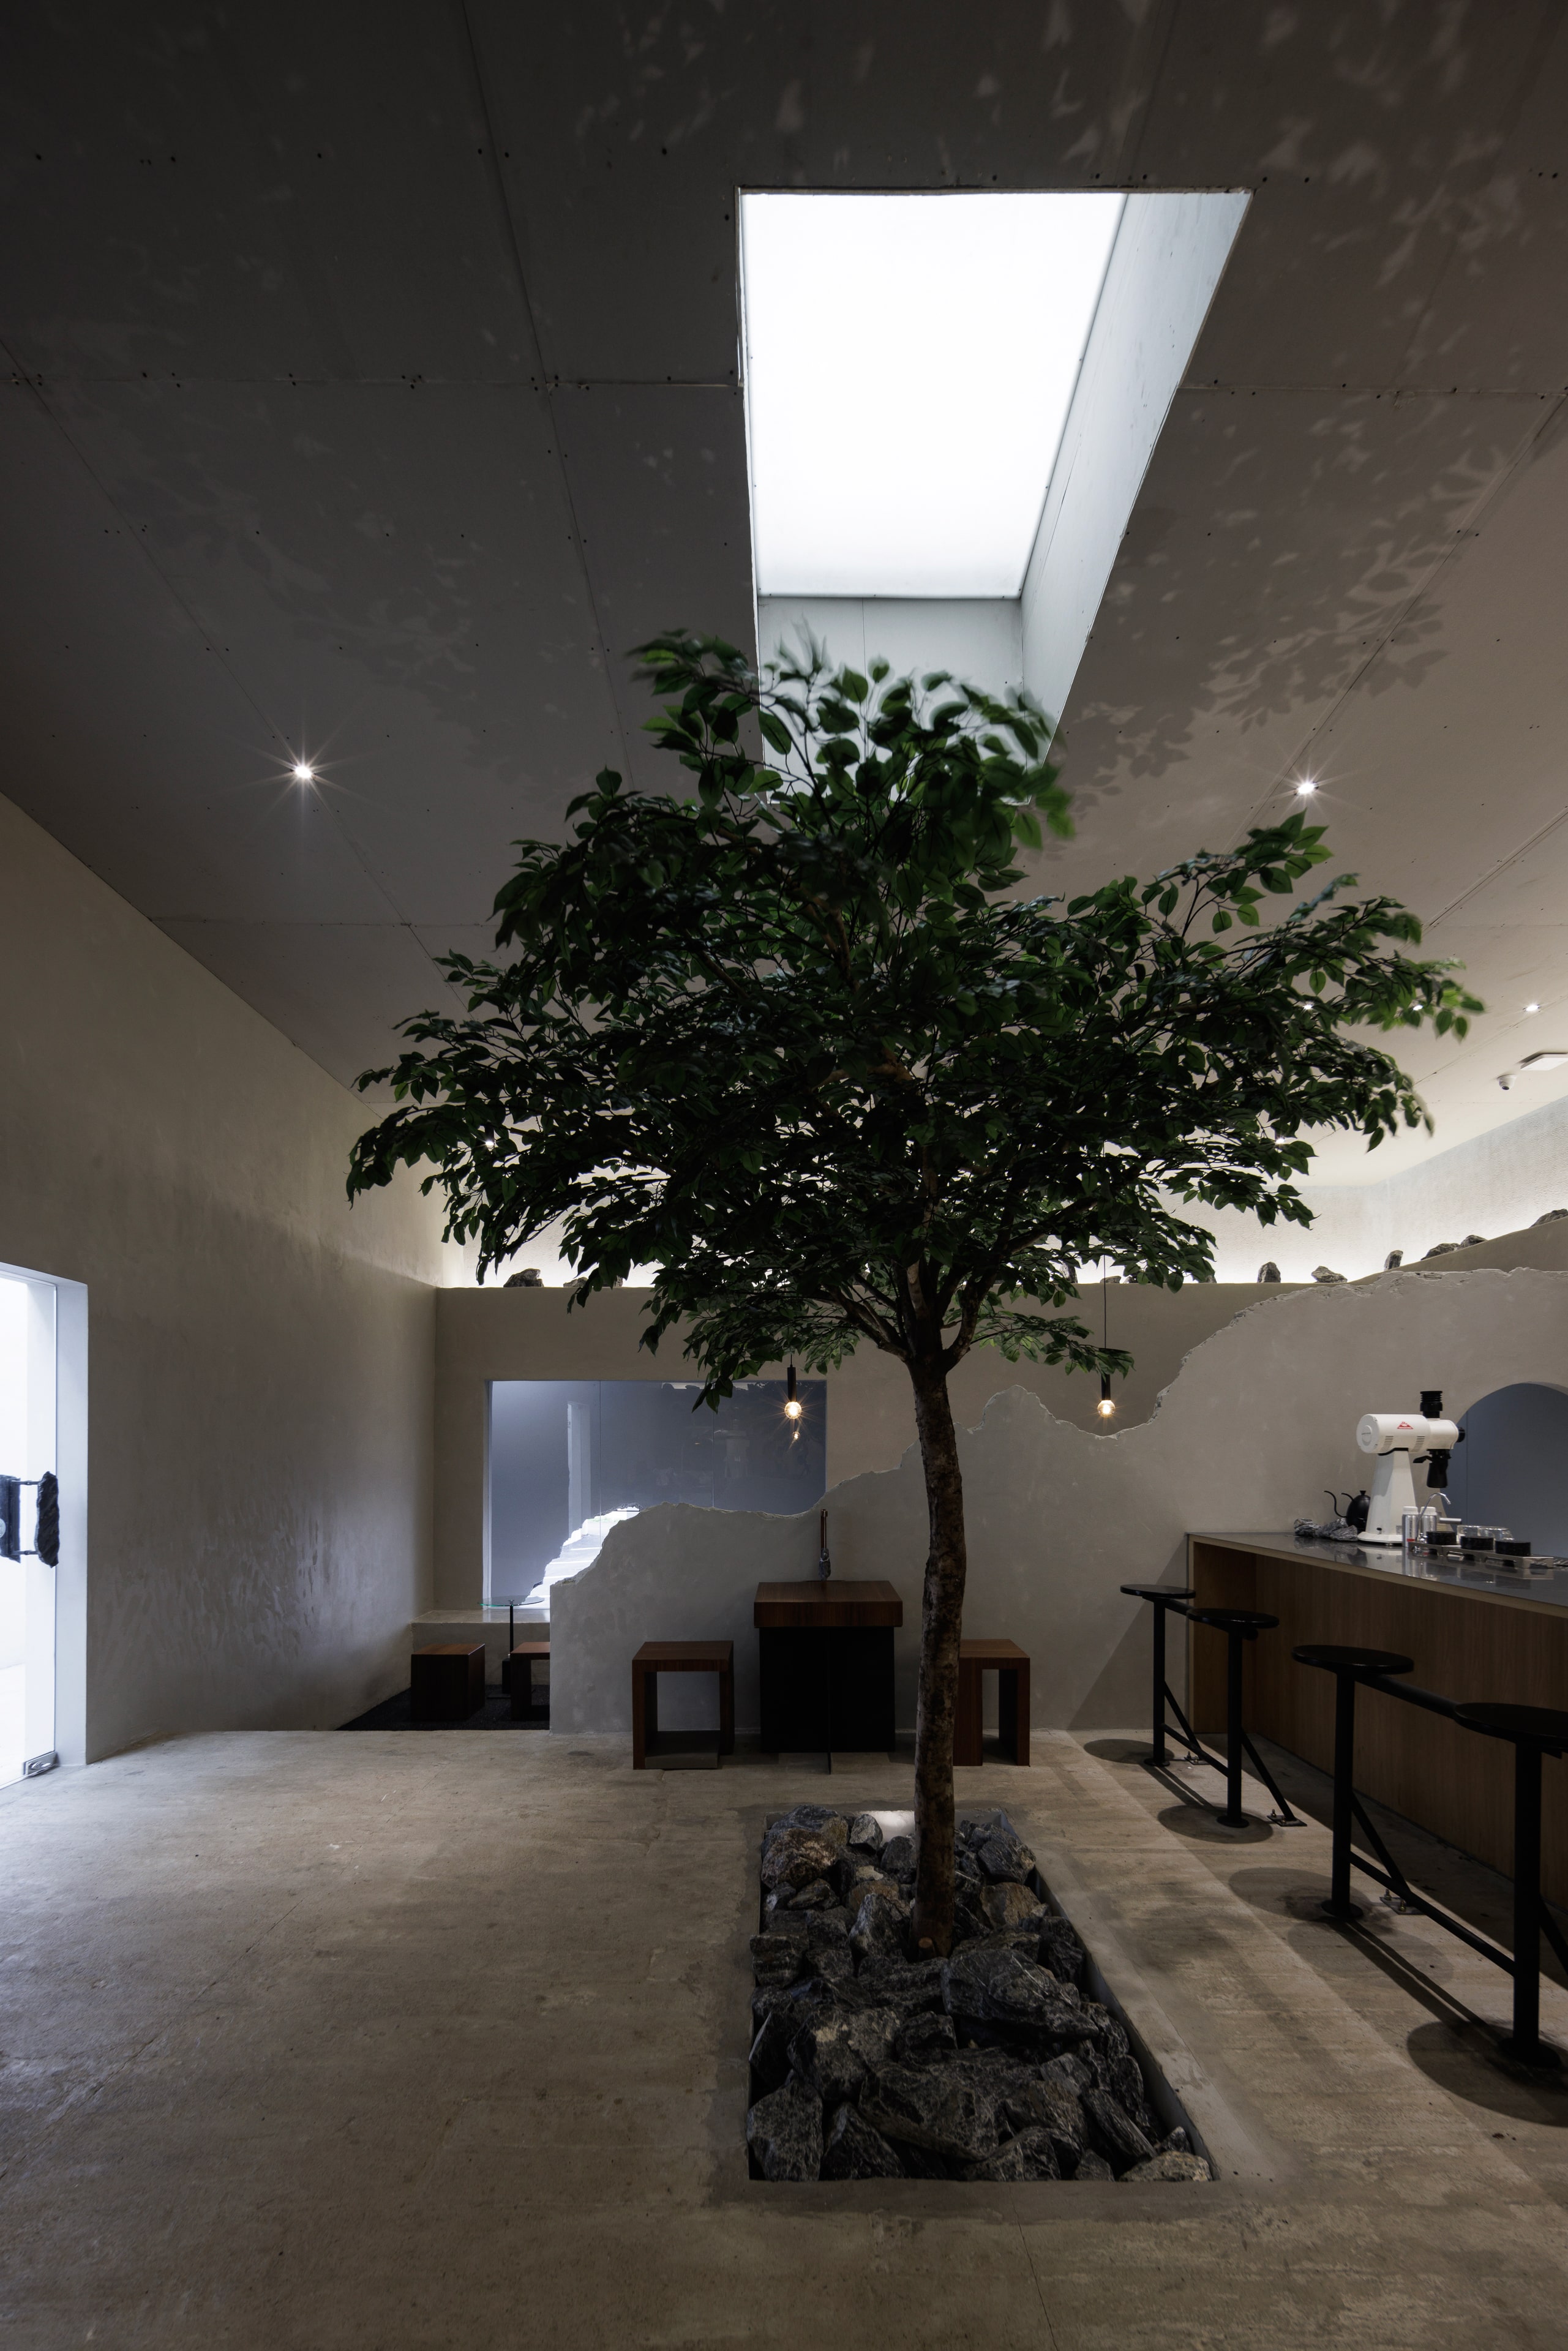 A tree standing alone under a skylight in the area received the order